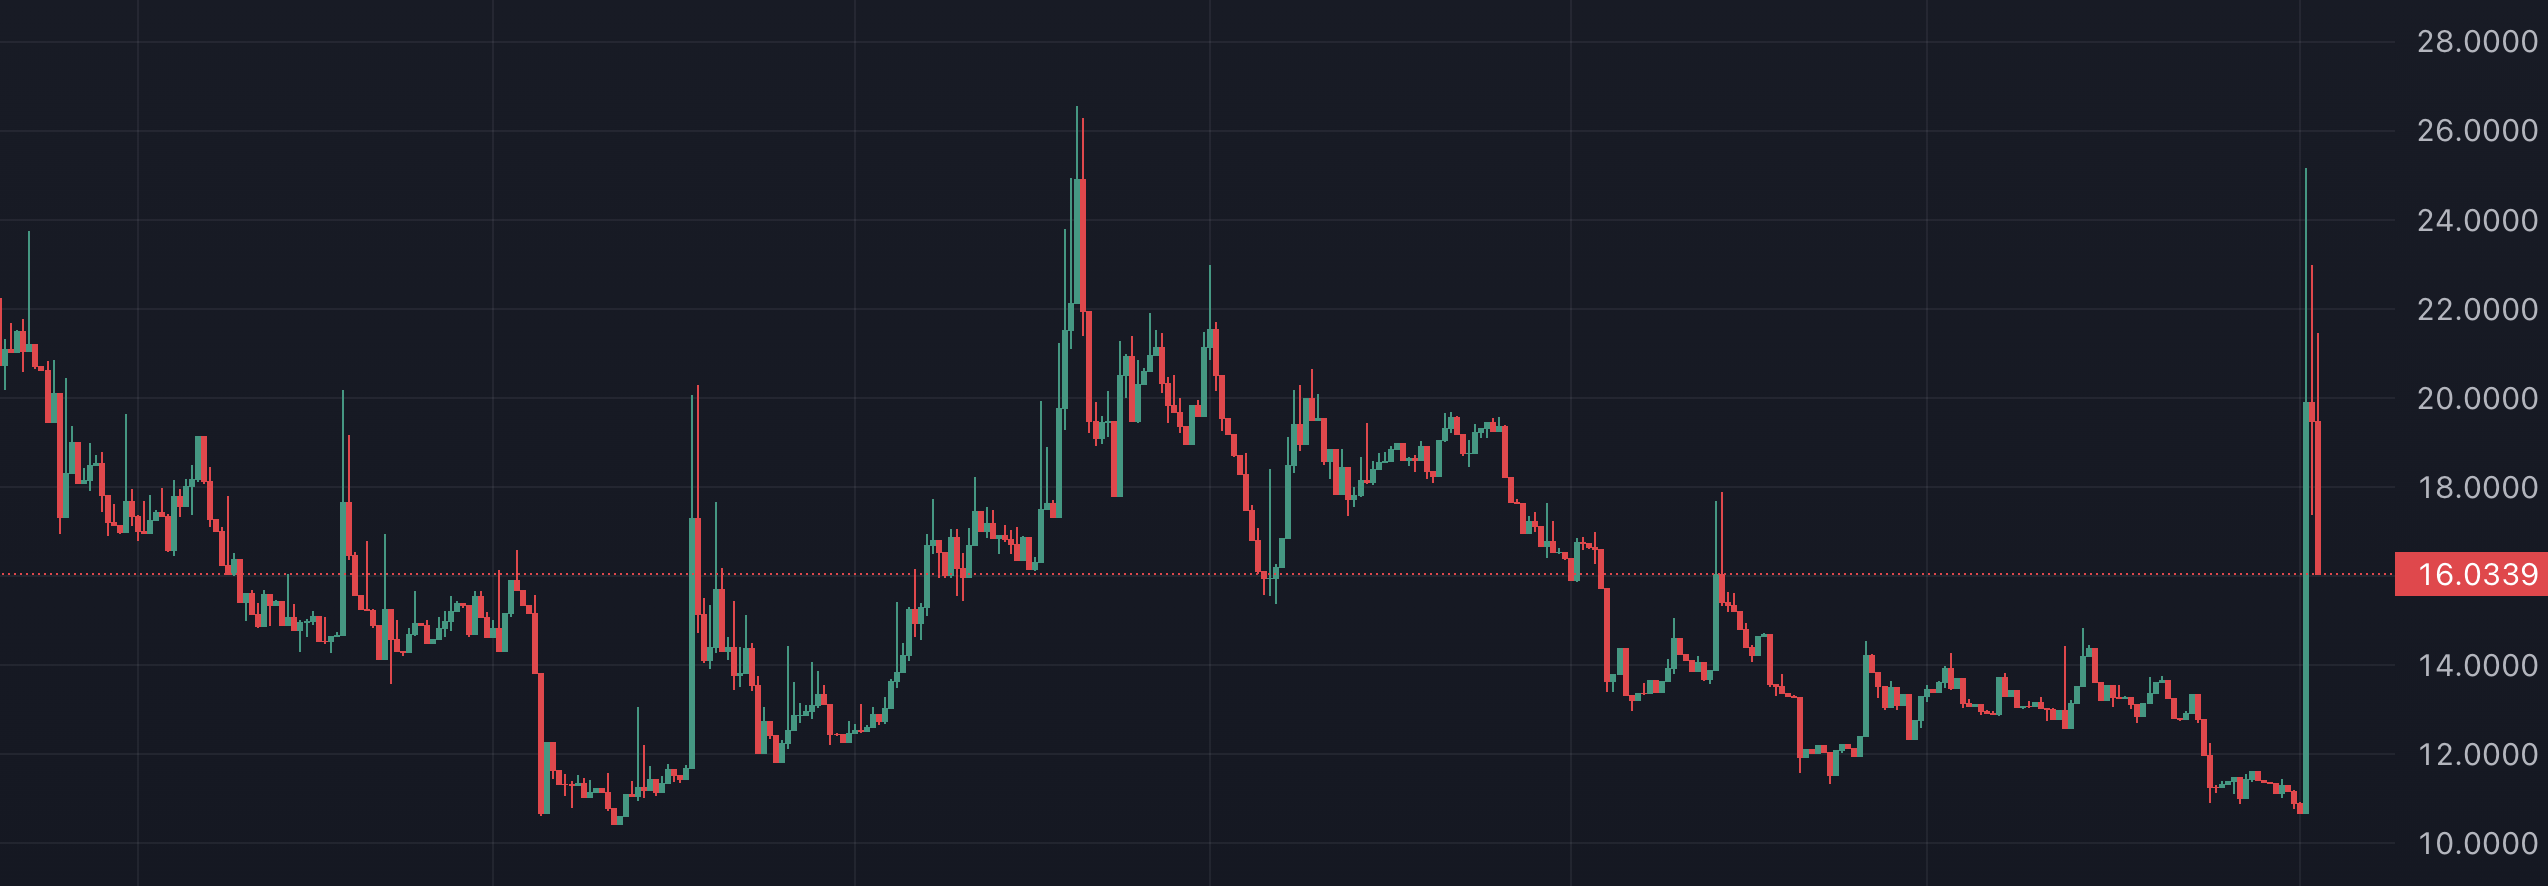 Price chart showing price action for the NMR coin